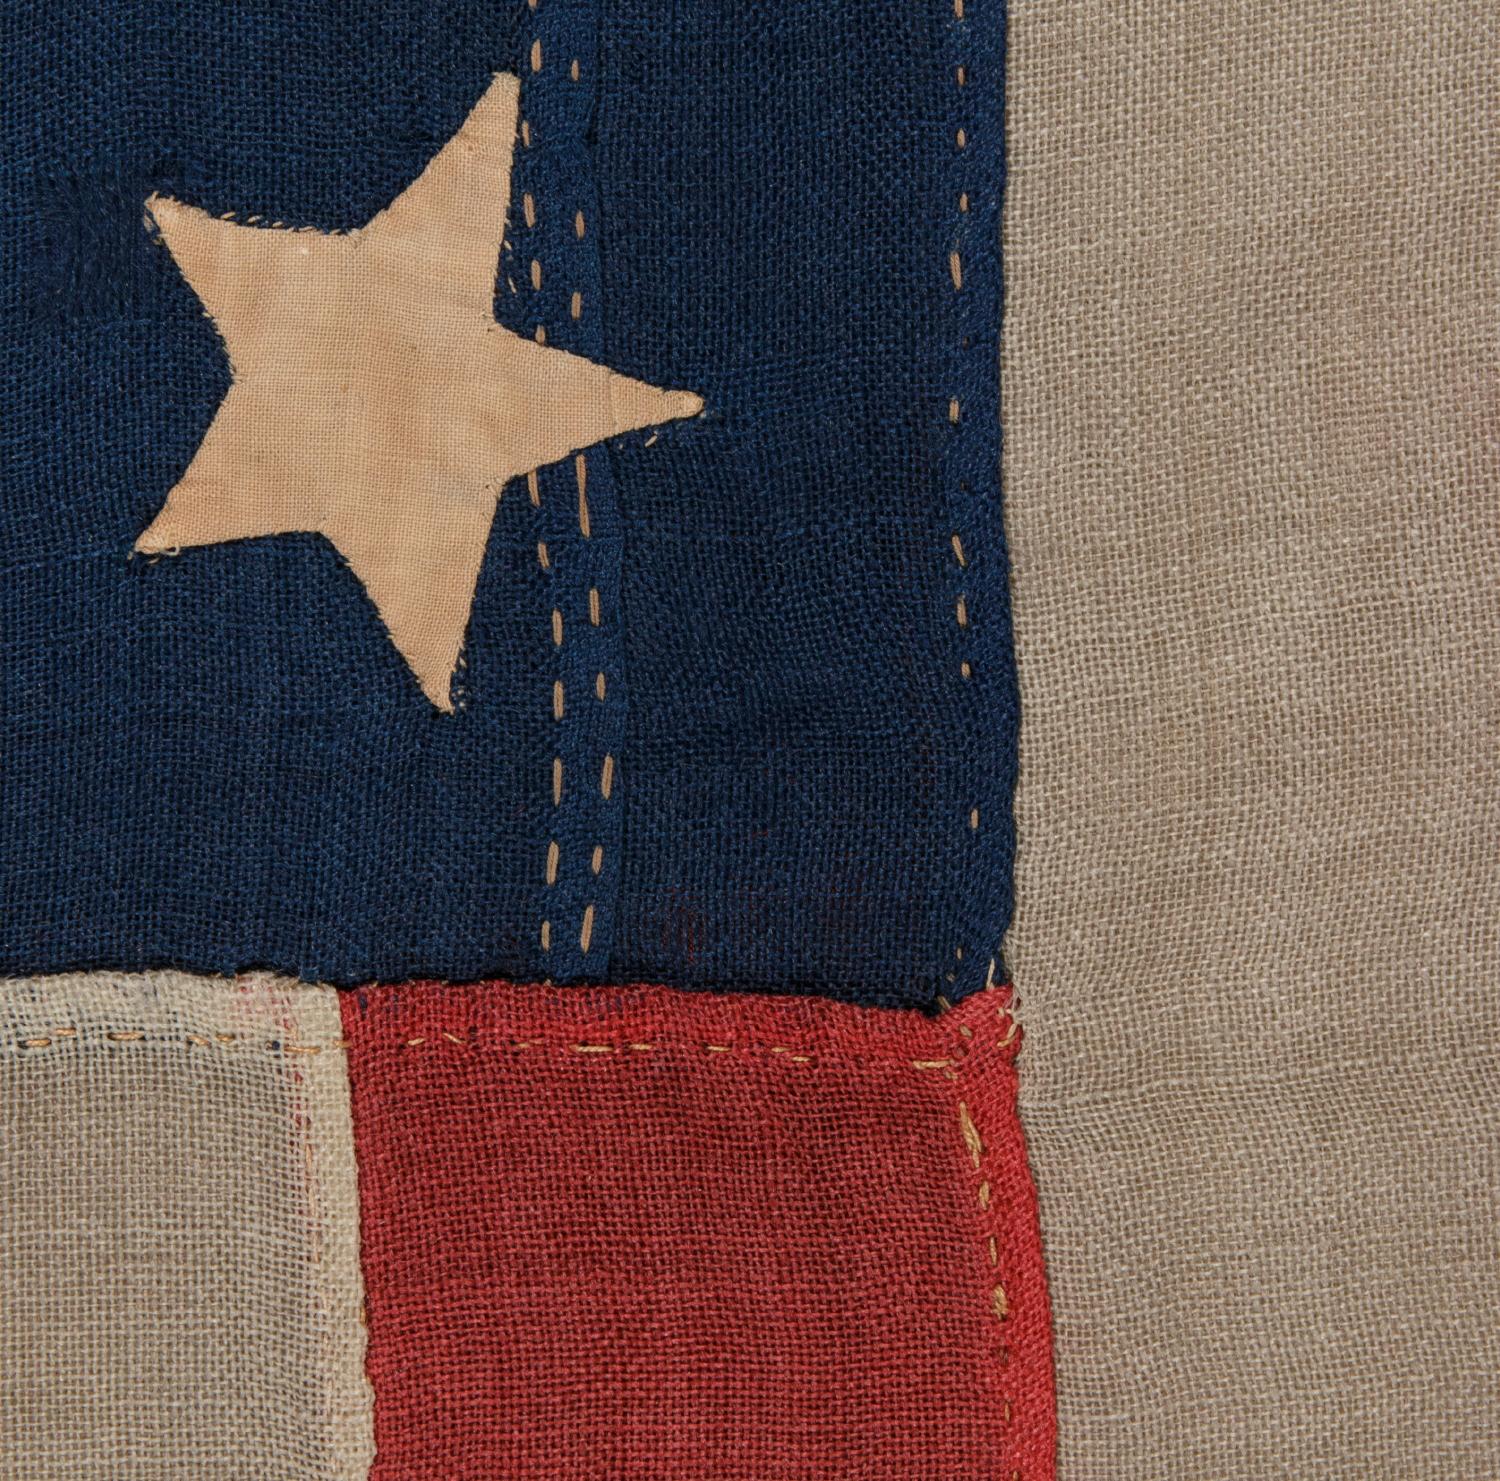 19th Century 37 Star Antique American Flag, Entirely Hand Sewn, Signed Foster, Phila. 1867-76